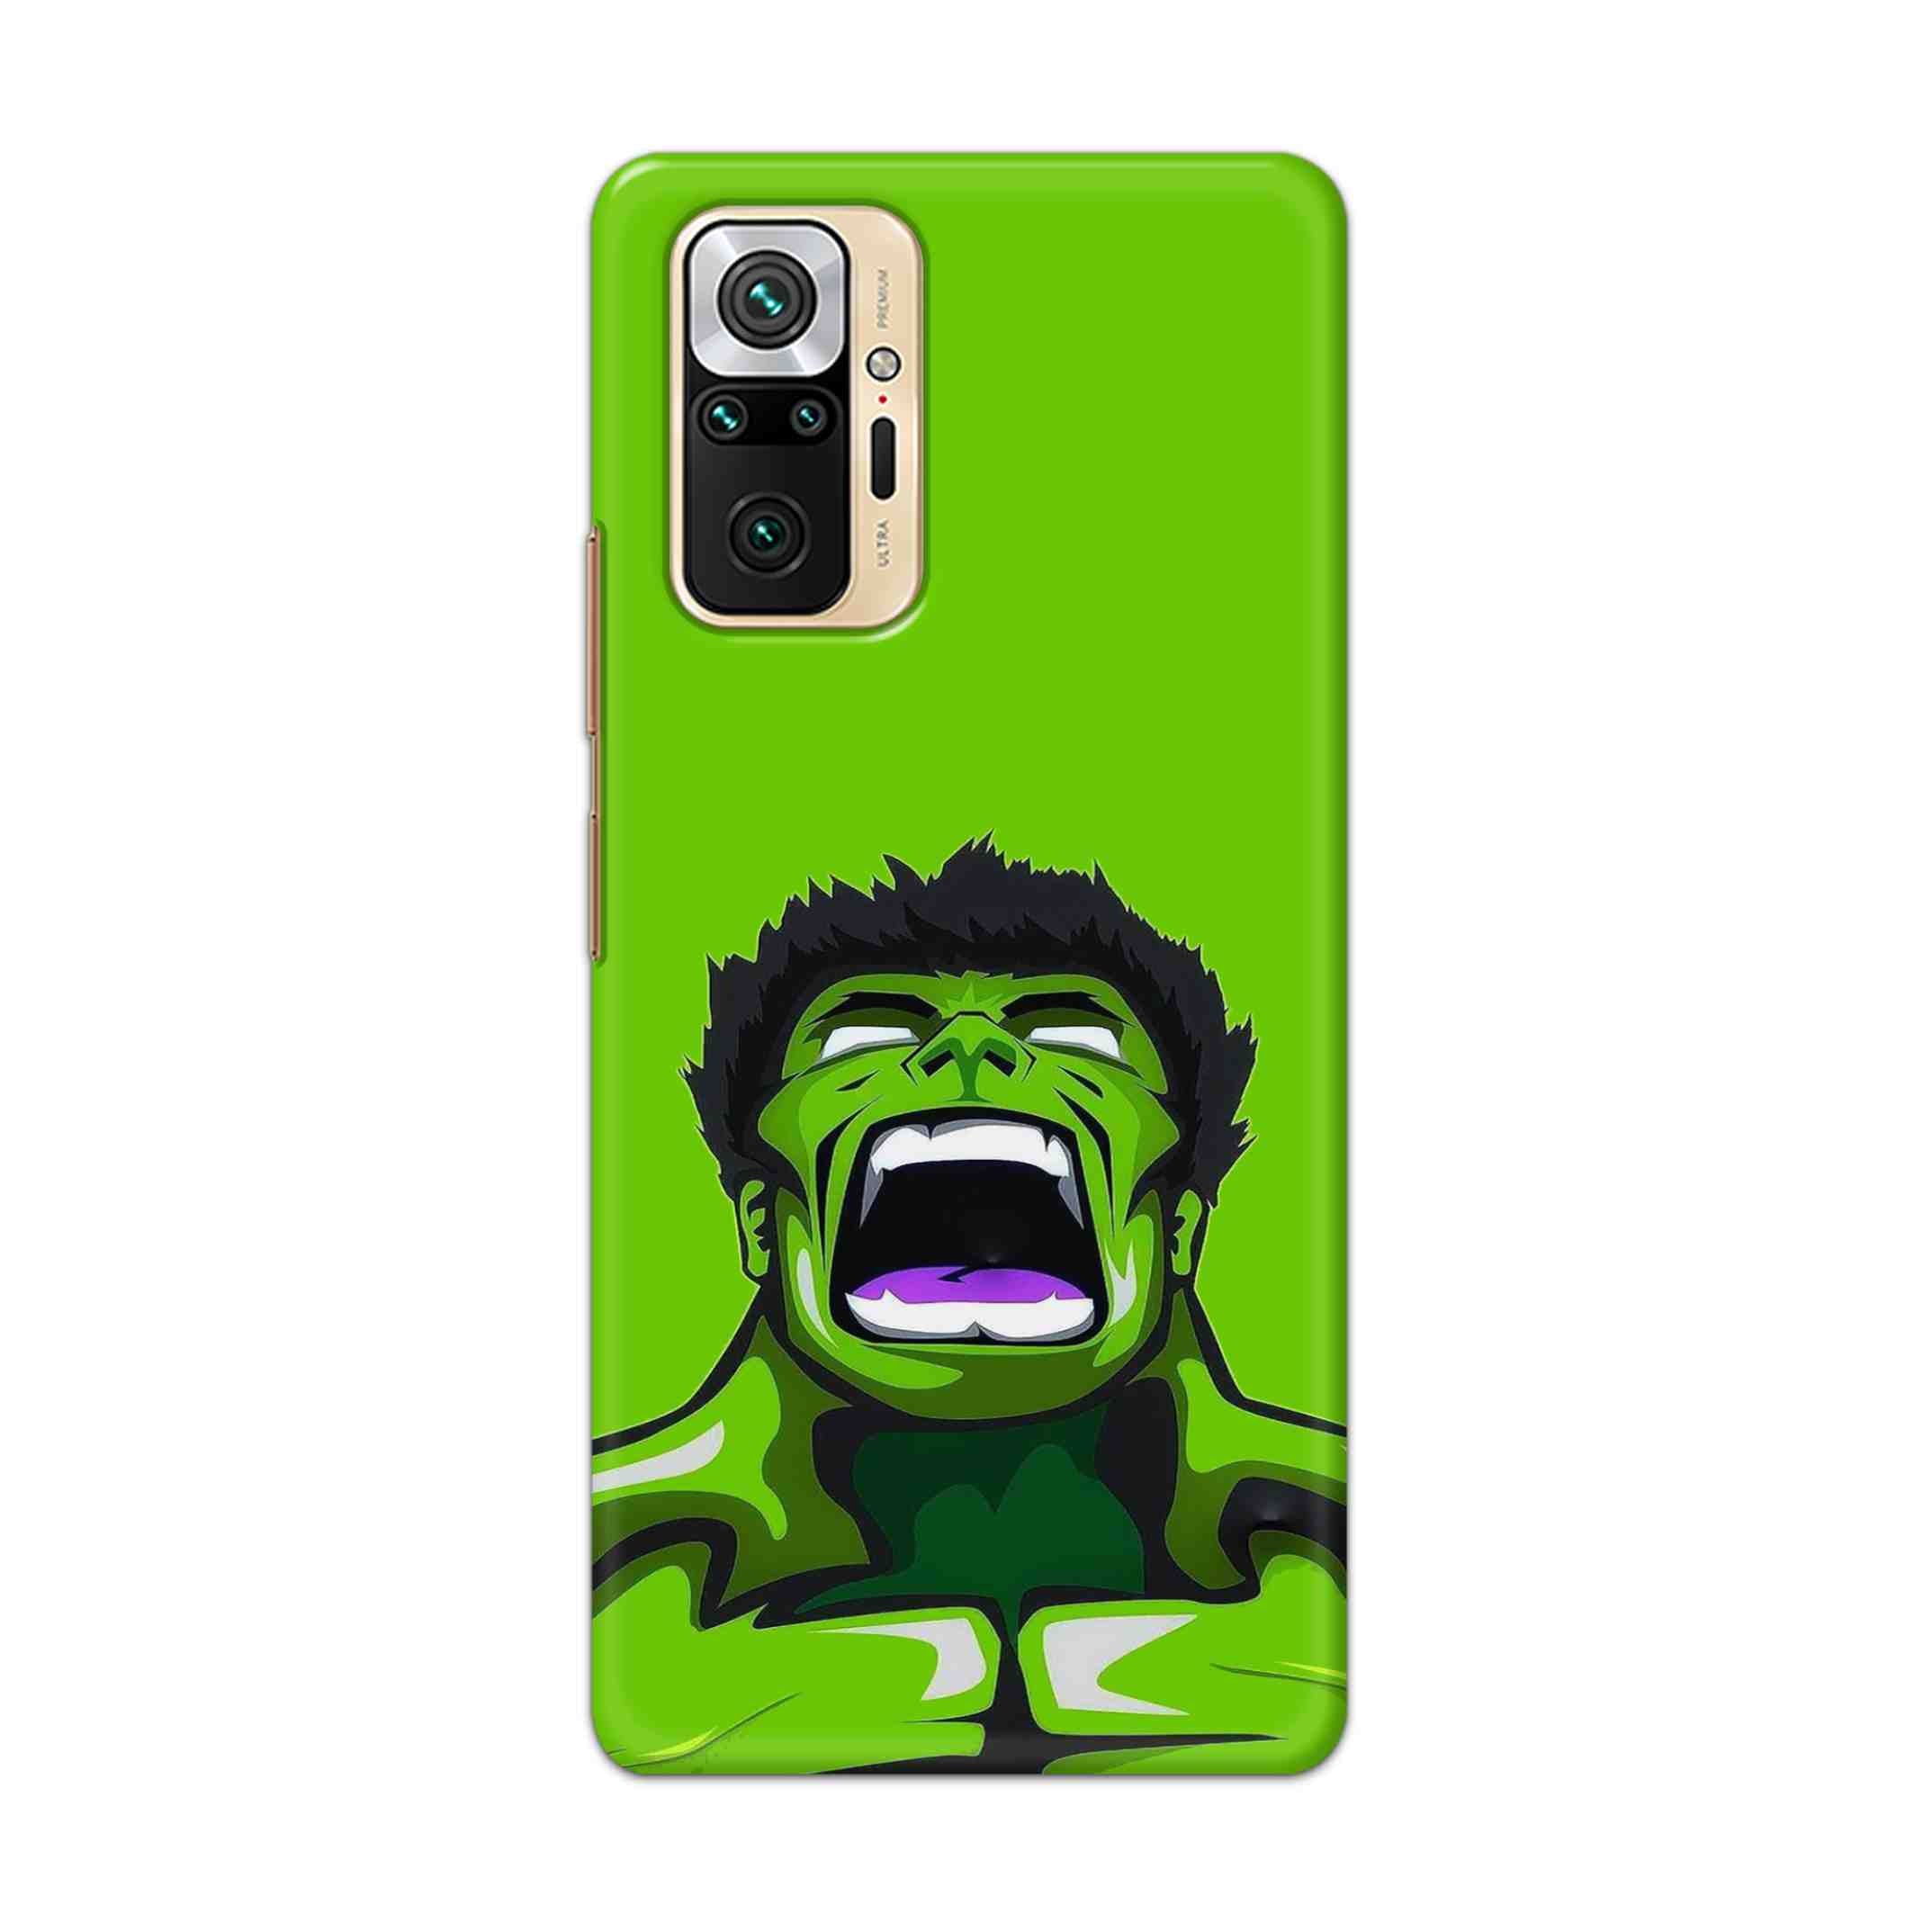 Buy Green Hulk Hard Back Mobile Phone Case Cover For Redmi Note 10 Pro Online